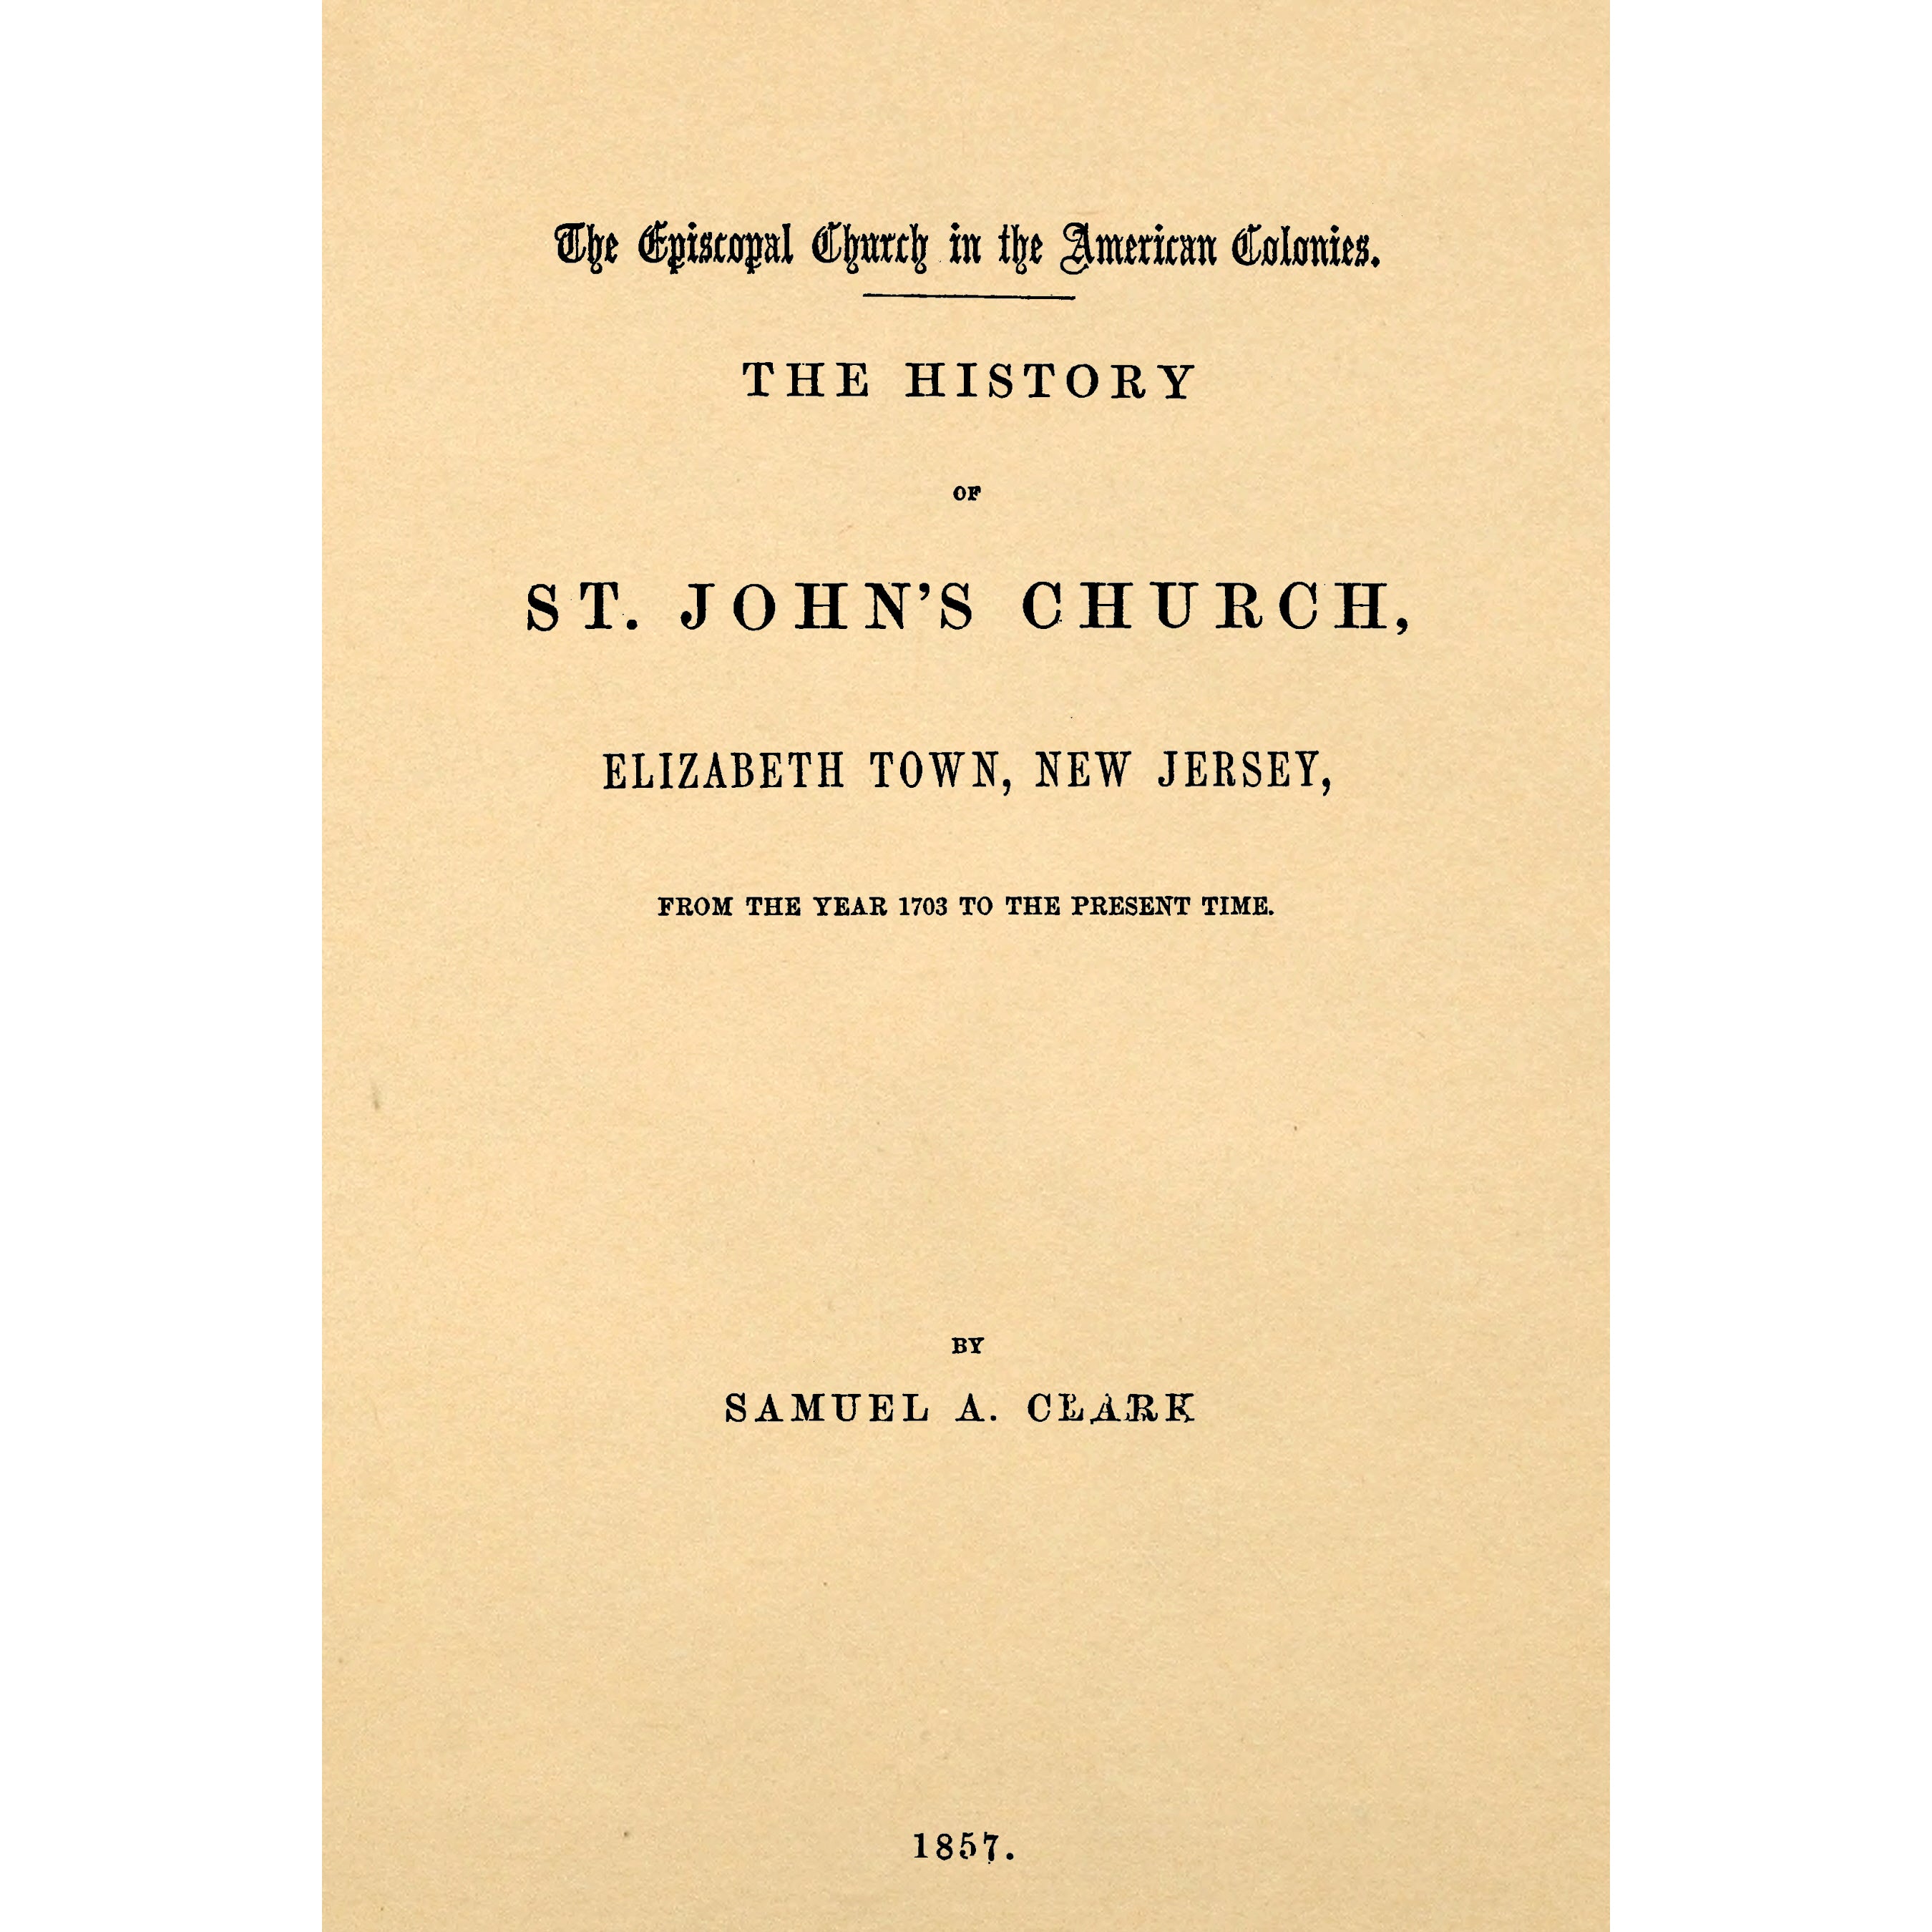 The history of St. John's Church, Elizabeth Town, New Jersey, from the year 1703 to the present time